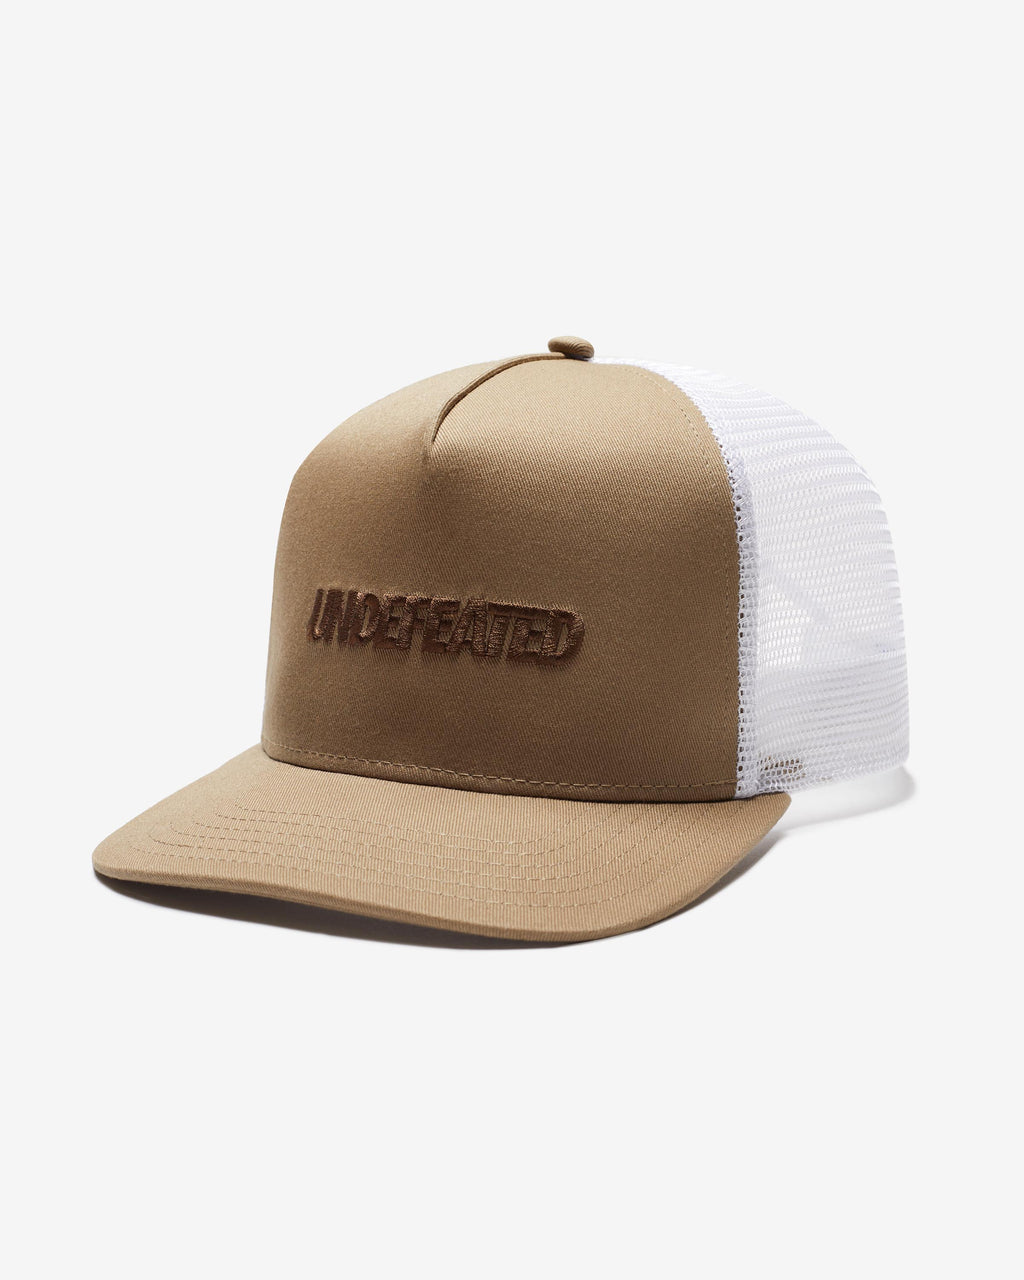 UNDEFEATED LOGO TRUCKER - TAUPE